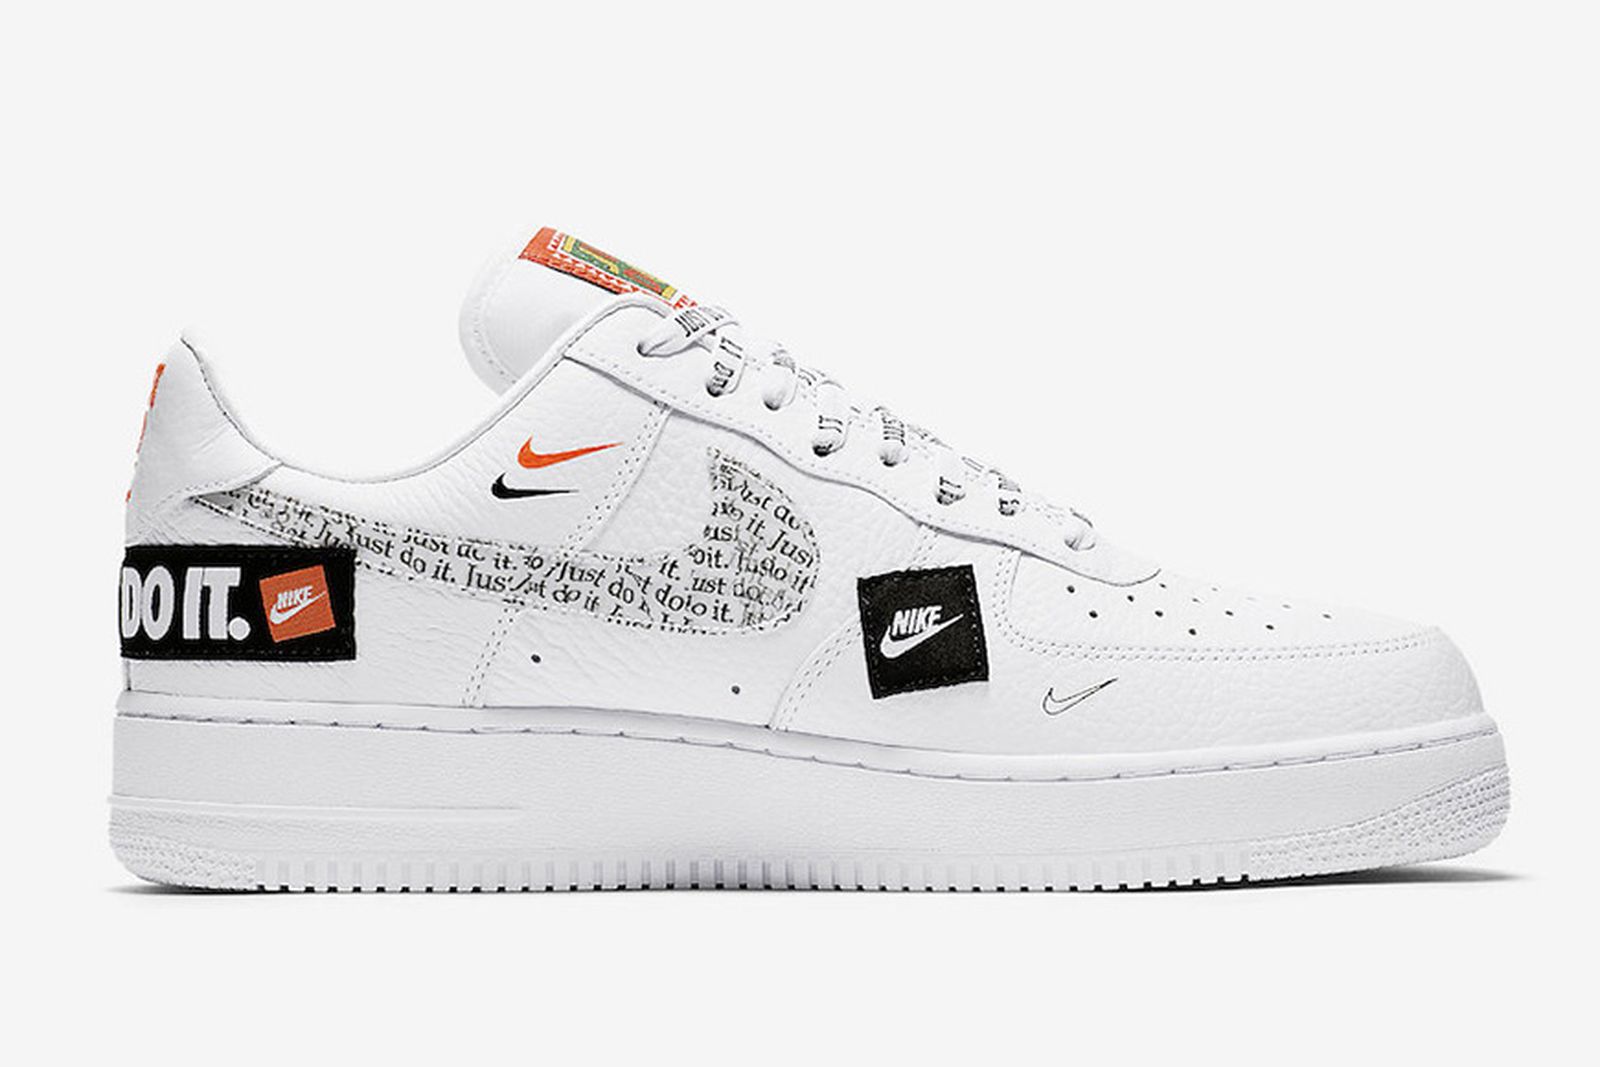 Air Force 1 "Just Do Release Date, Price, & More Info